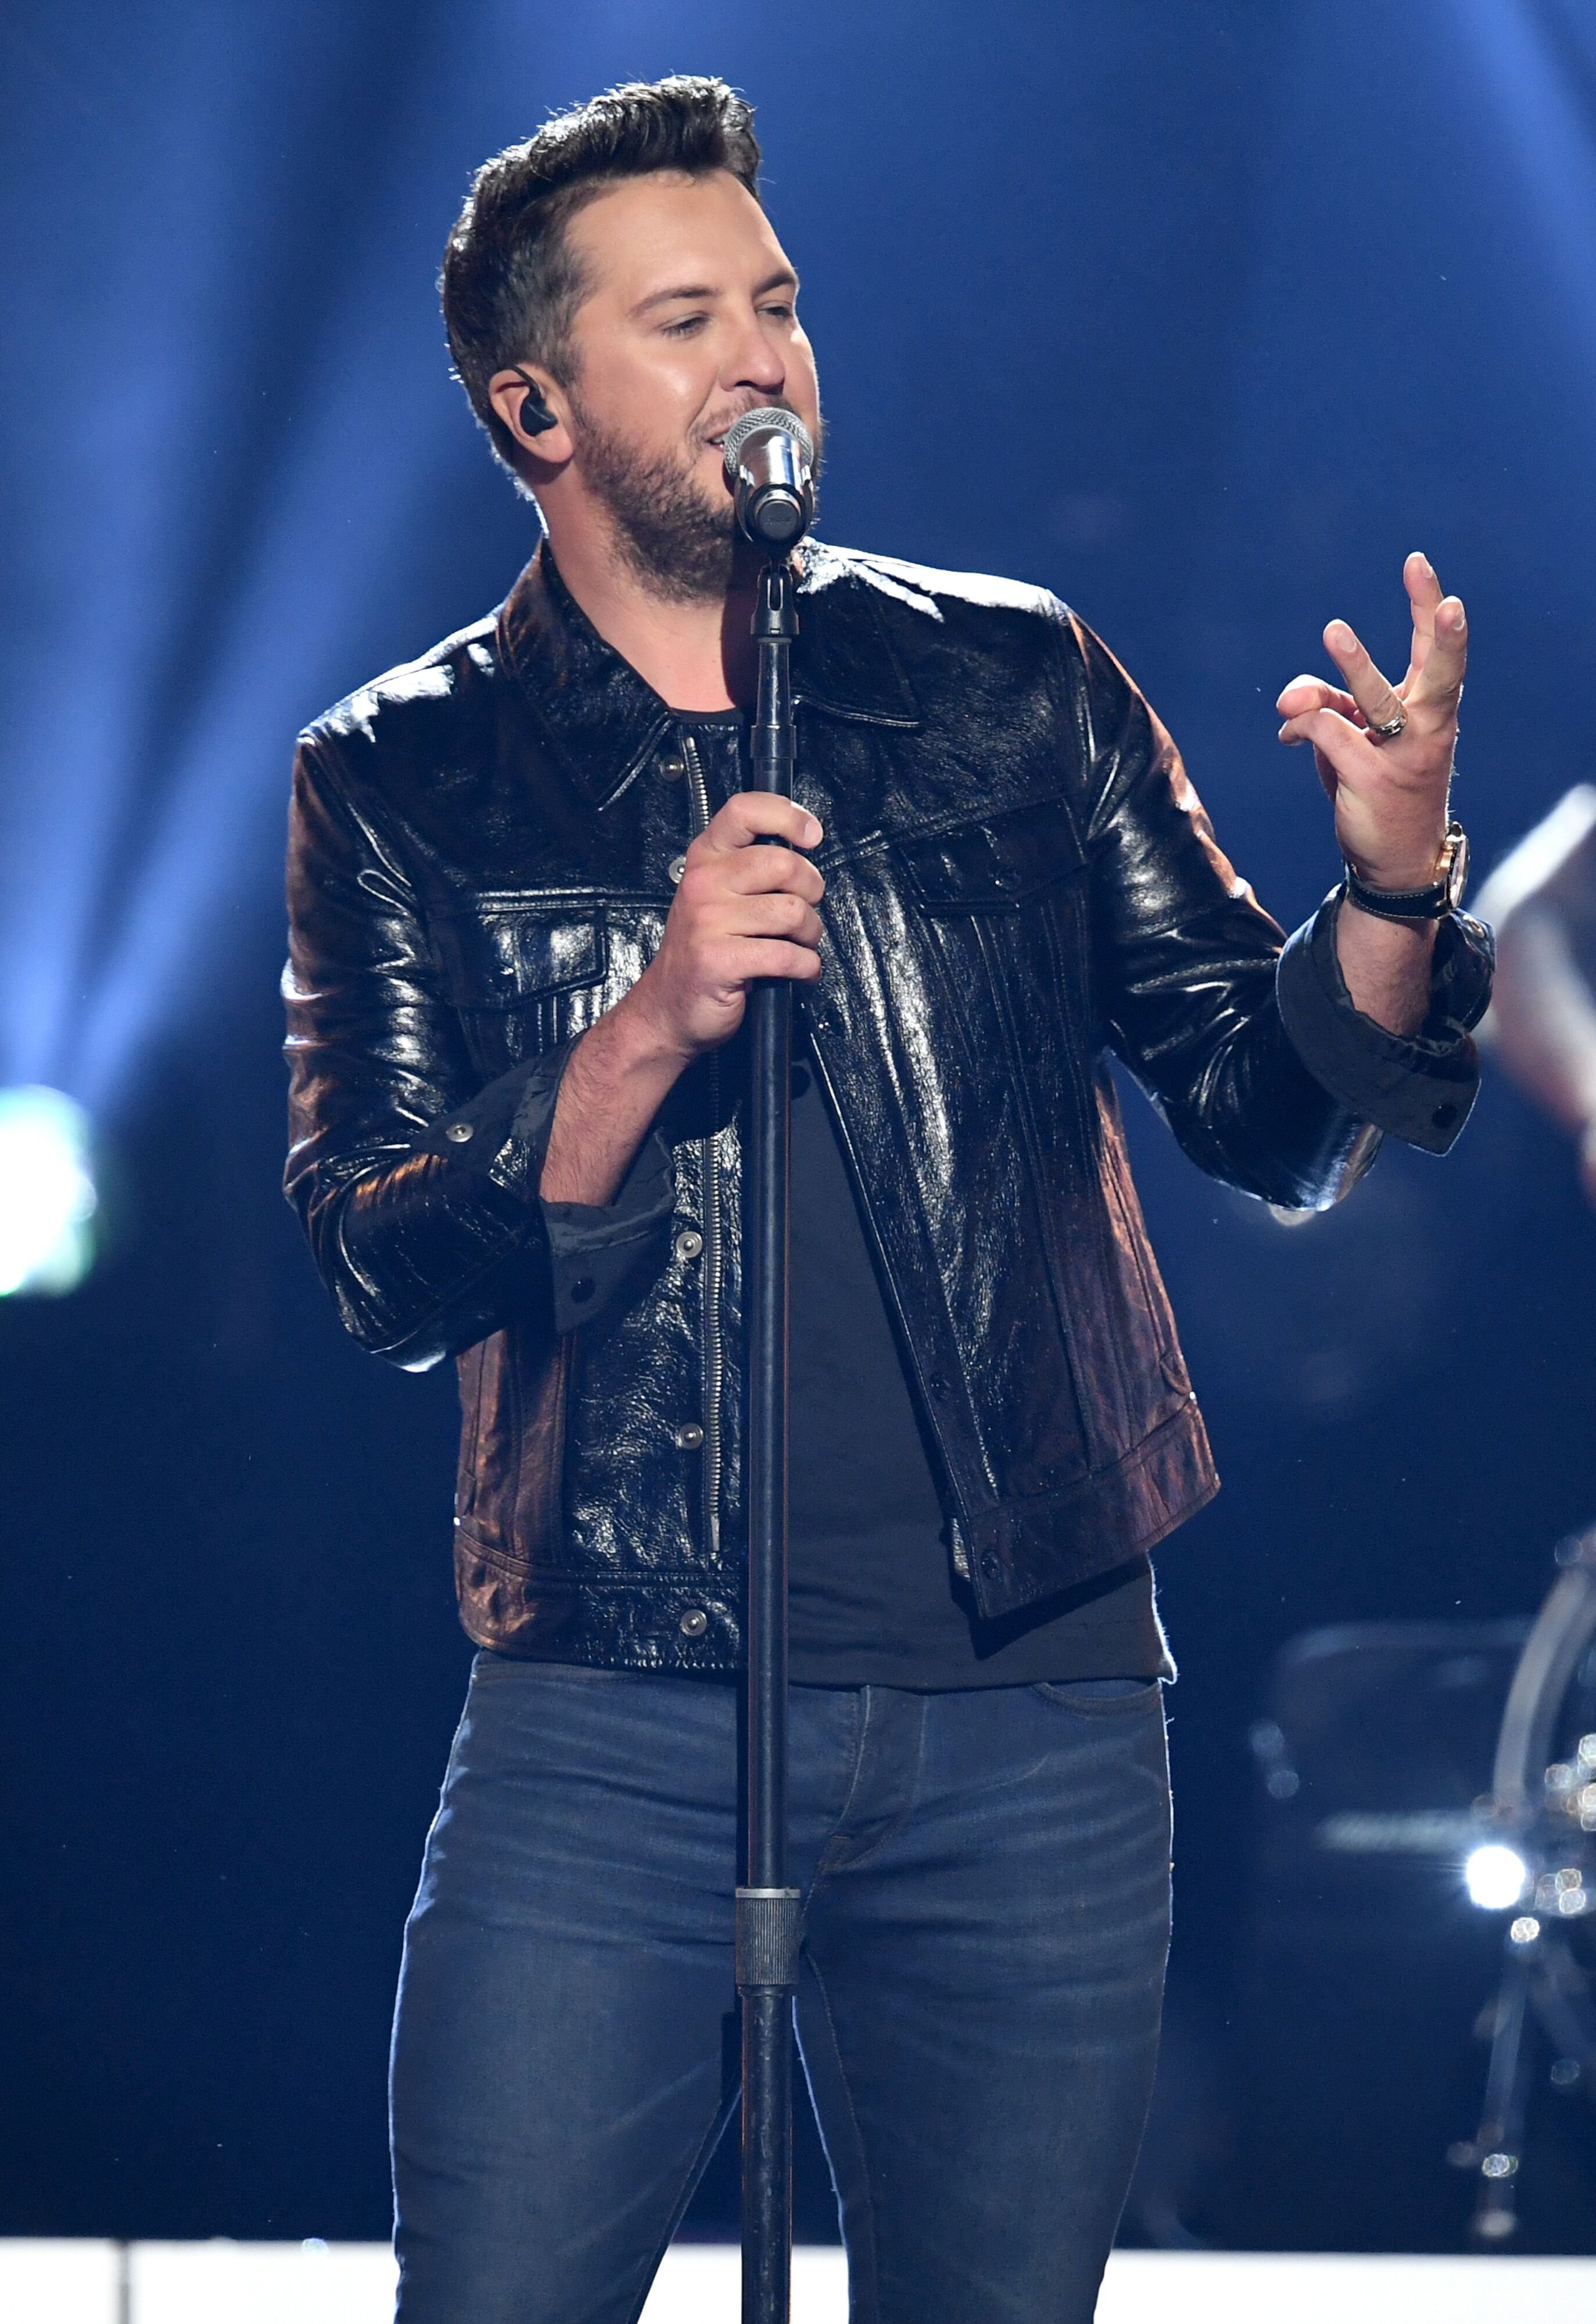 Luke Bryan & Kelly Clarkson to Perform during 2020 NFL Draft along with